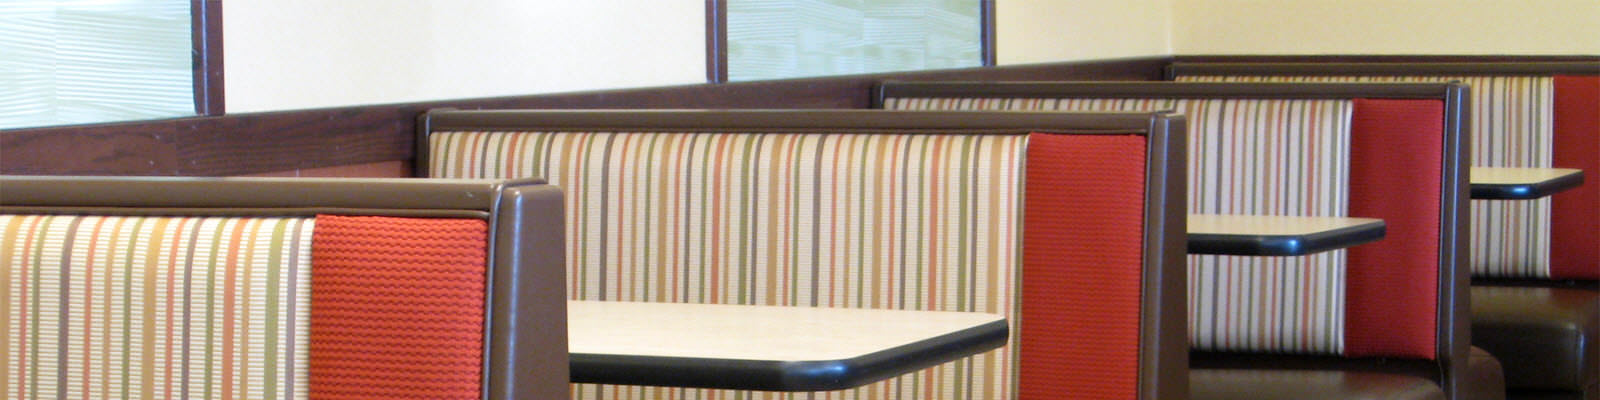 This restaurant booth faces a wall instead of a table. : r